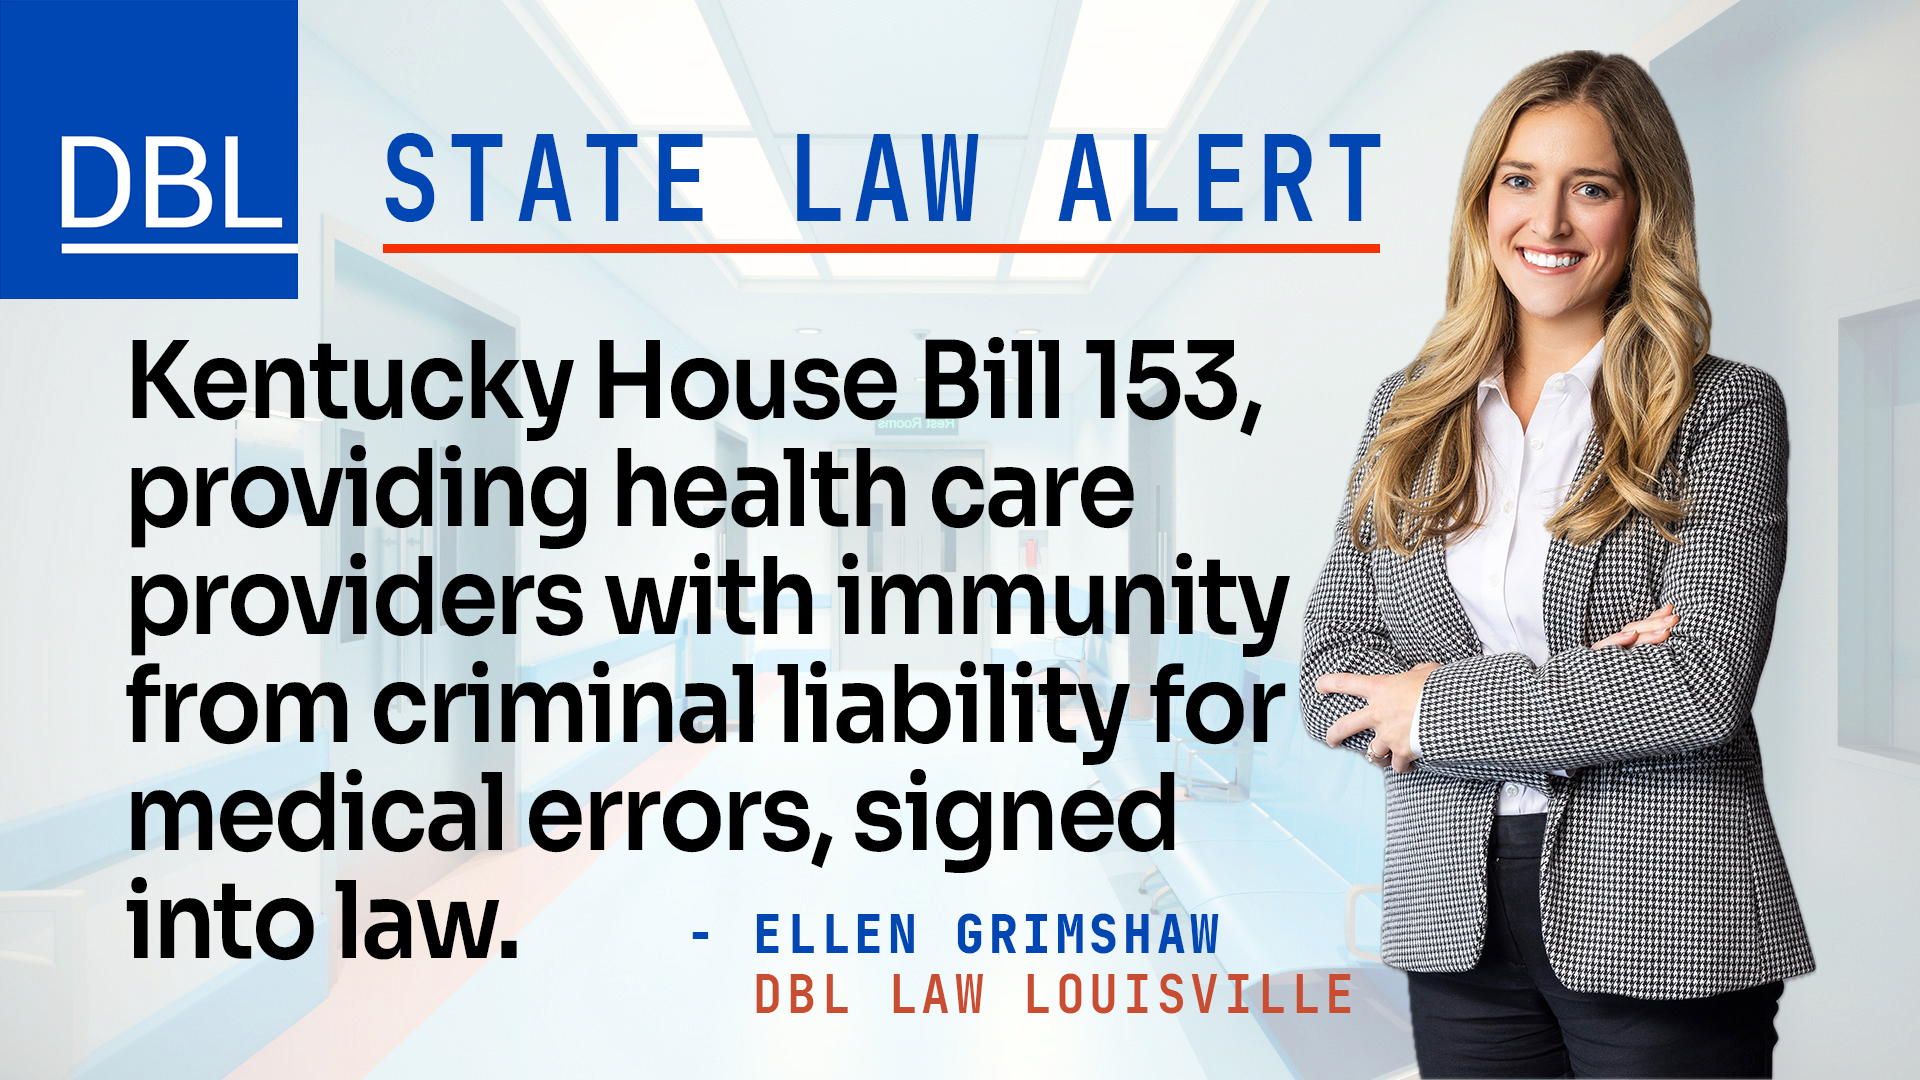 Kentucky House Bill 153, providing health care providers with immunity from criminal liability for medical errors, signed into law.